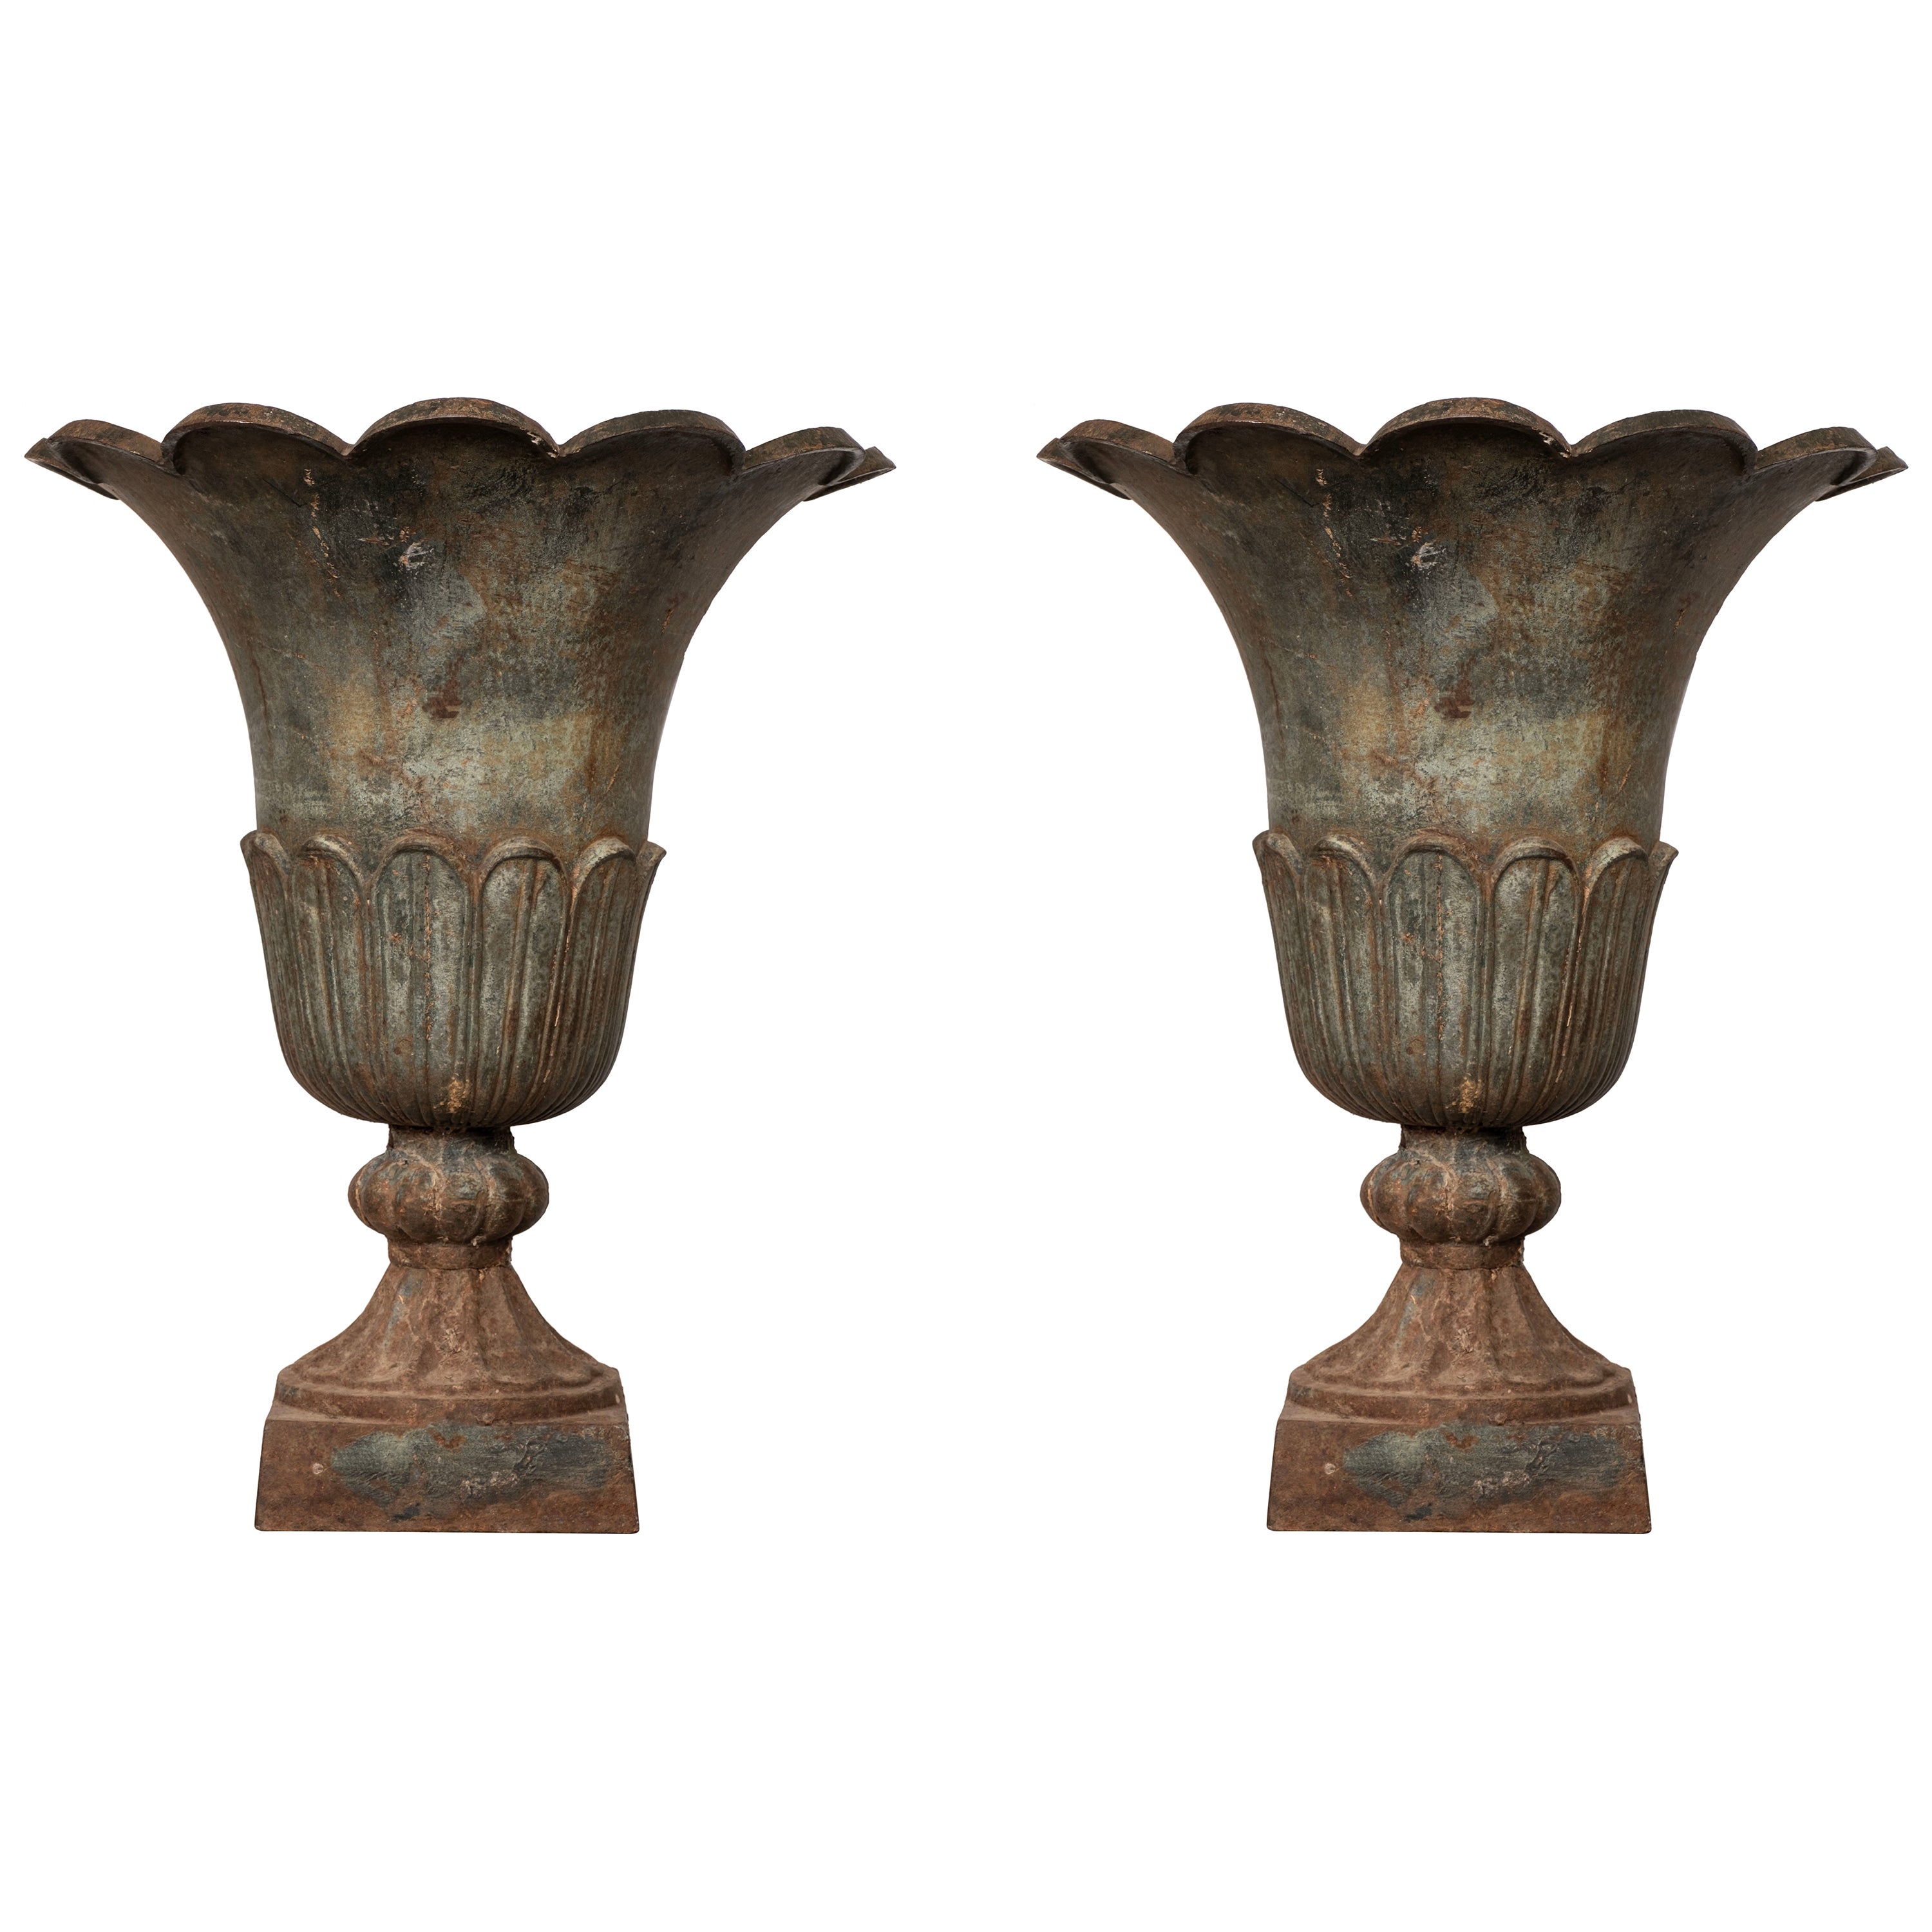 Monumental Pair of French Art Deco Cast Iron Garden Urns or Planters